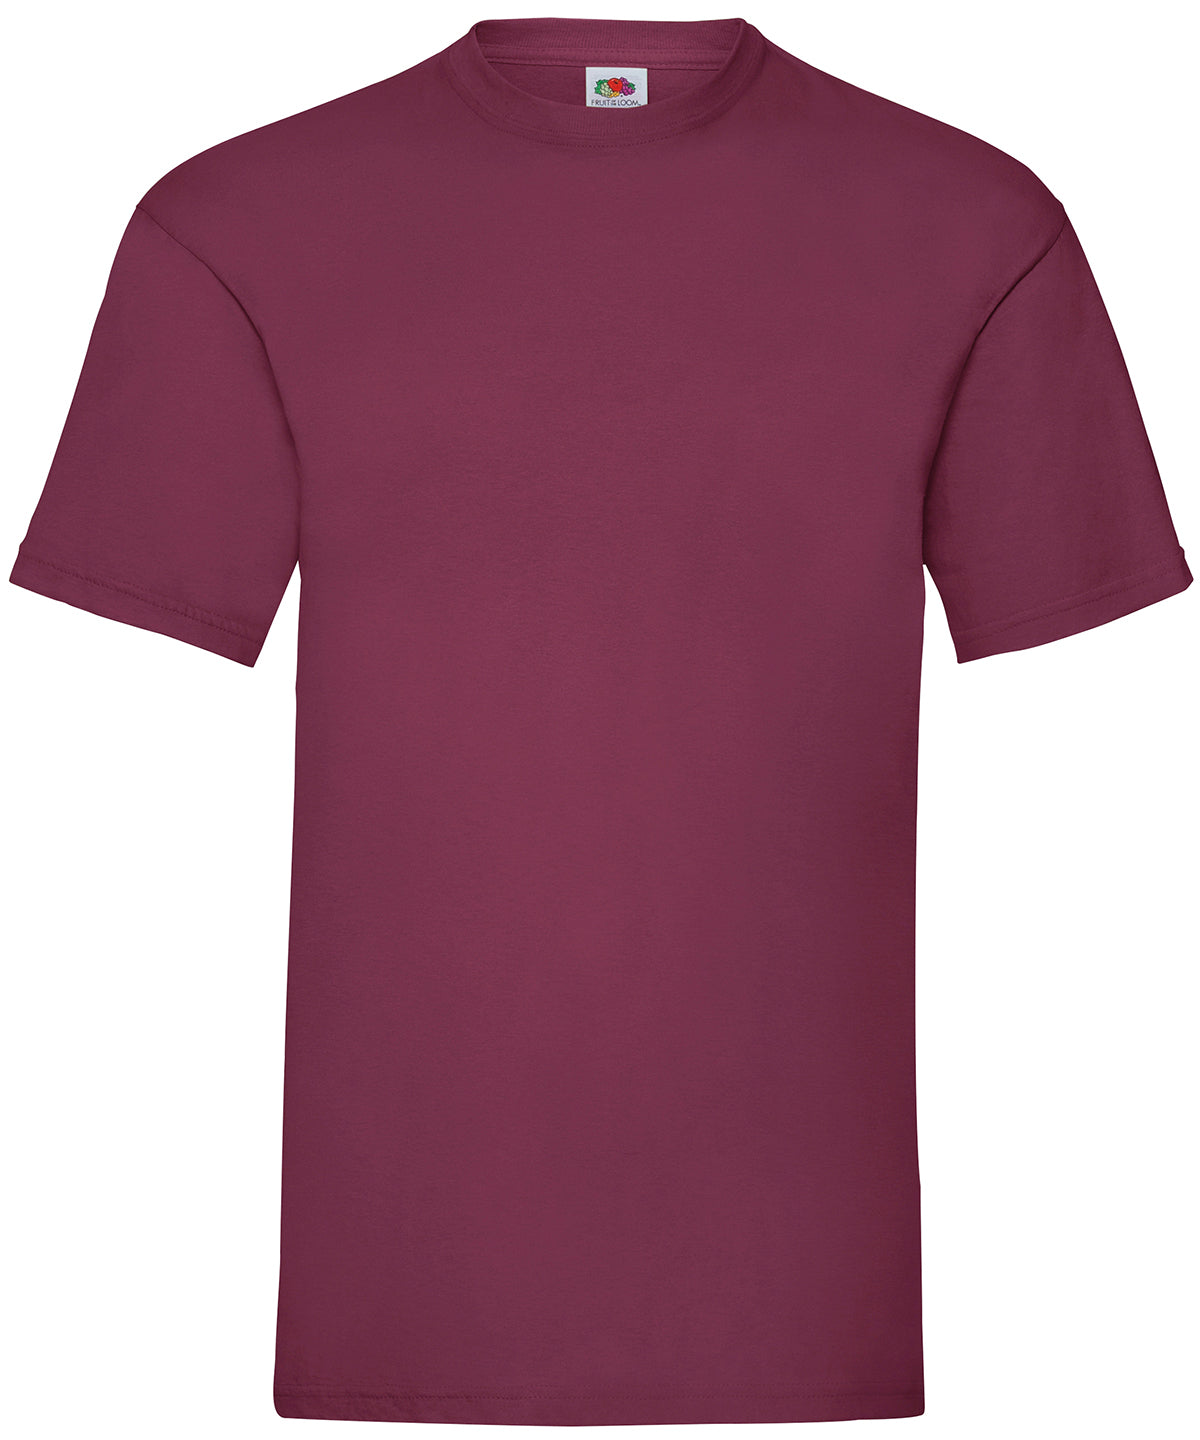 Fruit of the Loom Valueweight T Burgundy